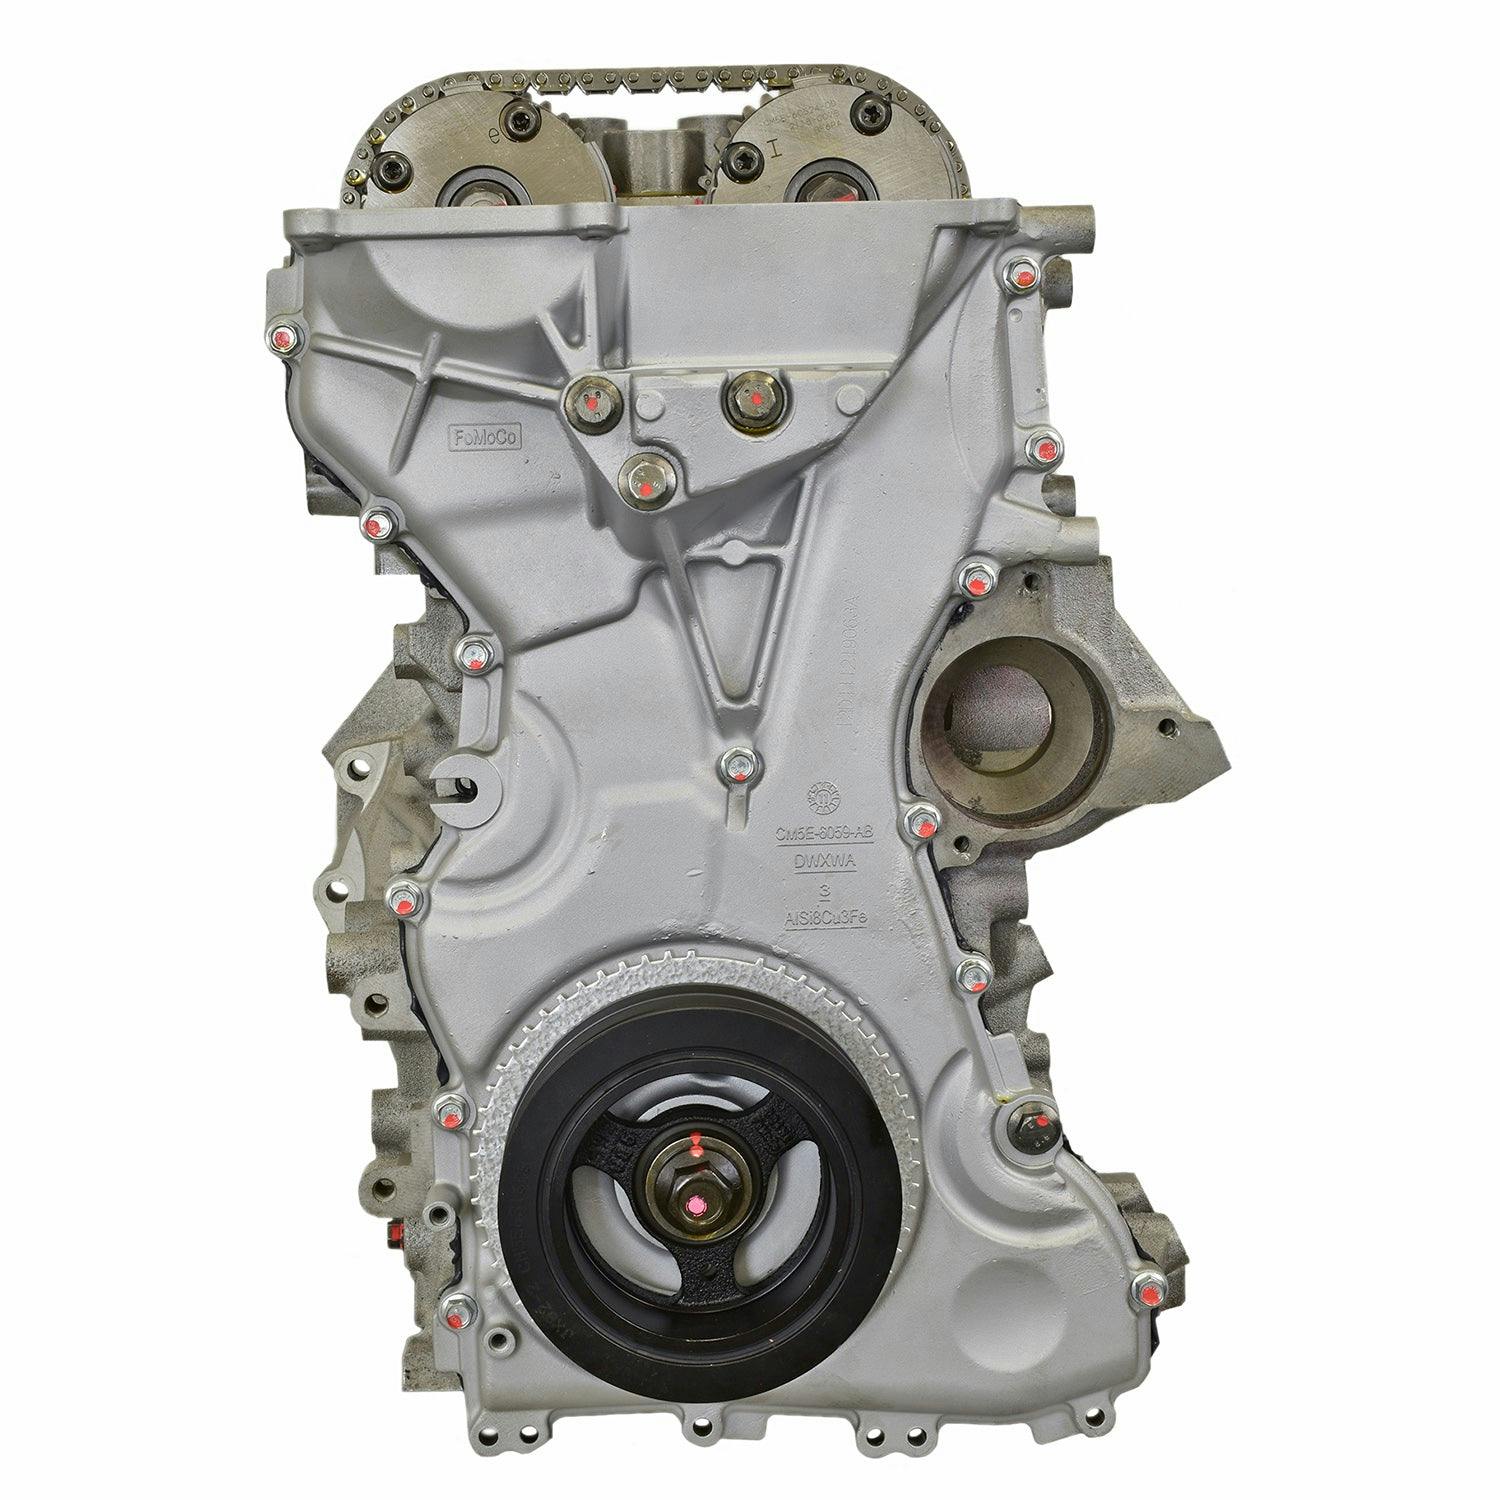 2L Inline-4 Engine for 2012-2014 Ford Focus